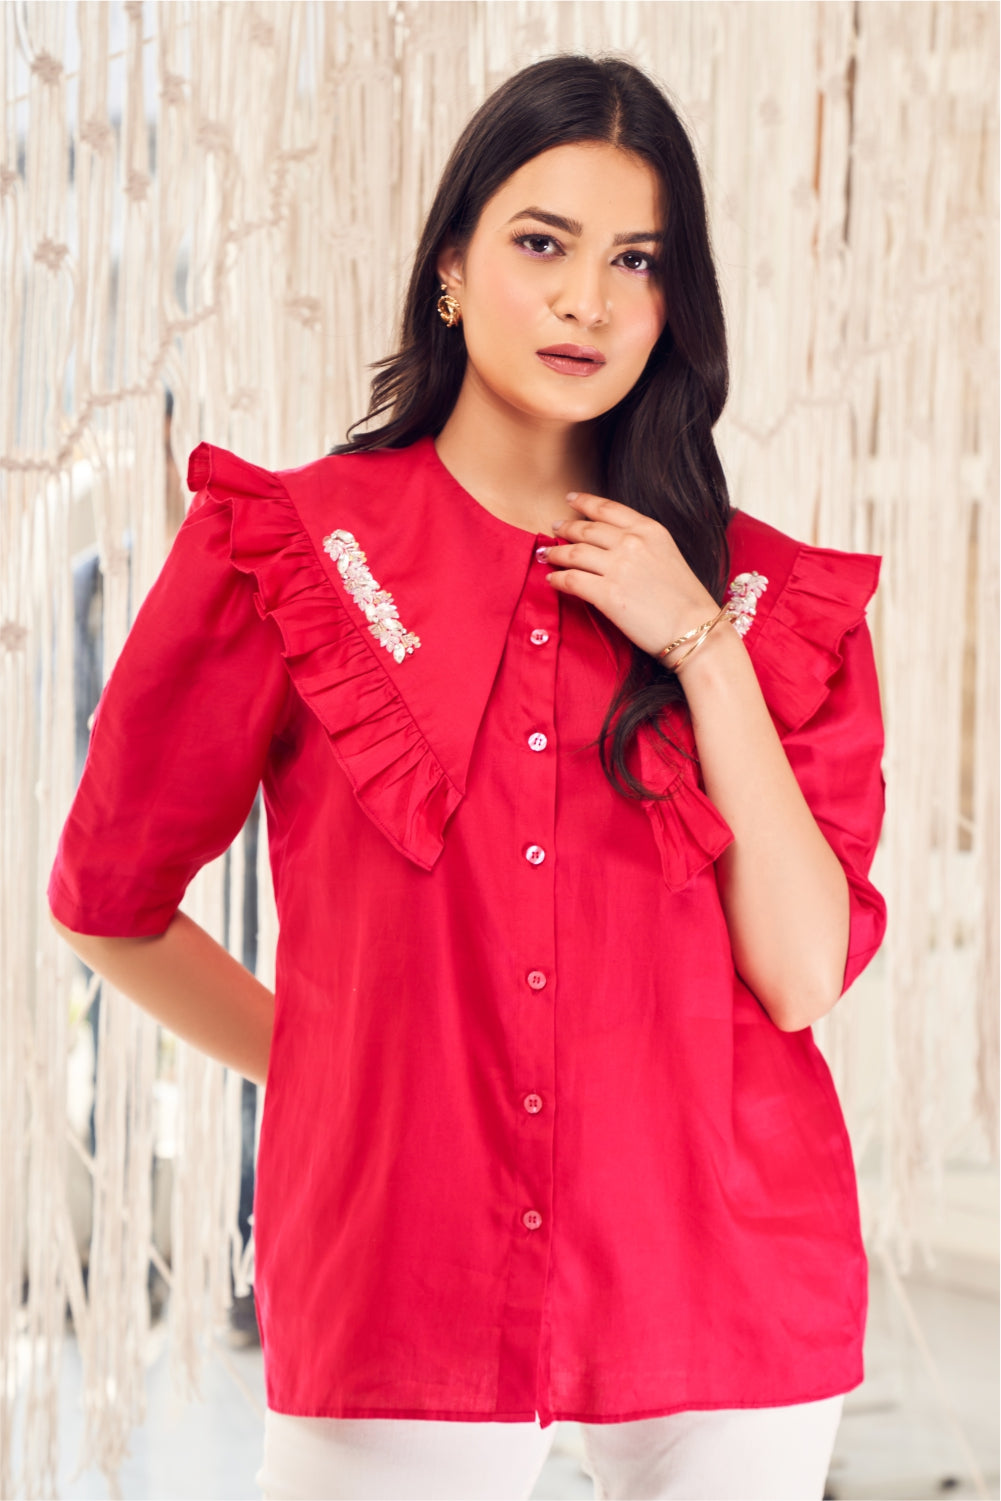 Hot Pink Frilled Collar Shirt With Embellishment